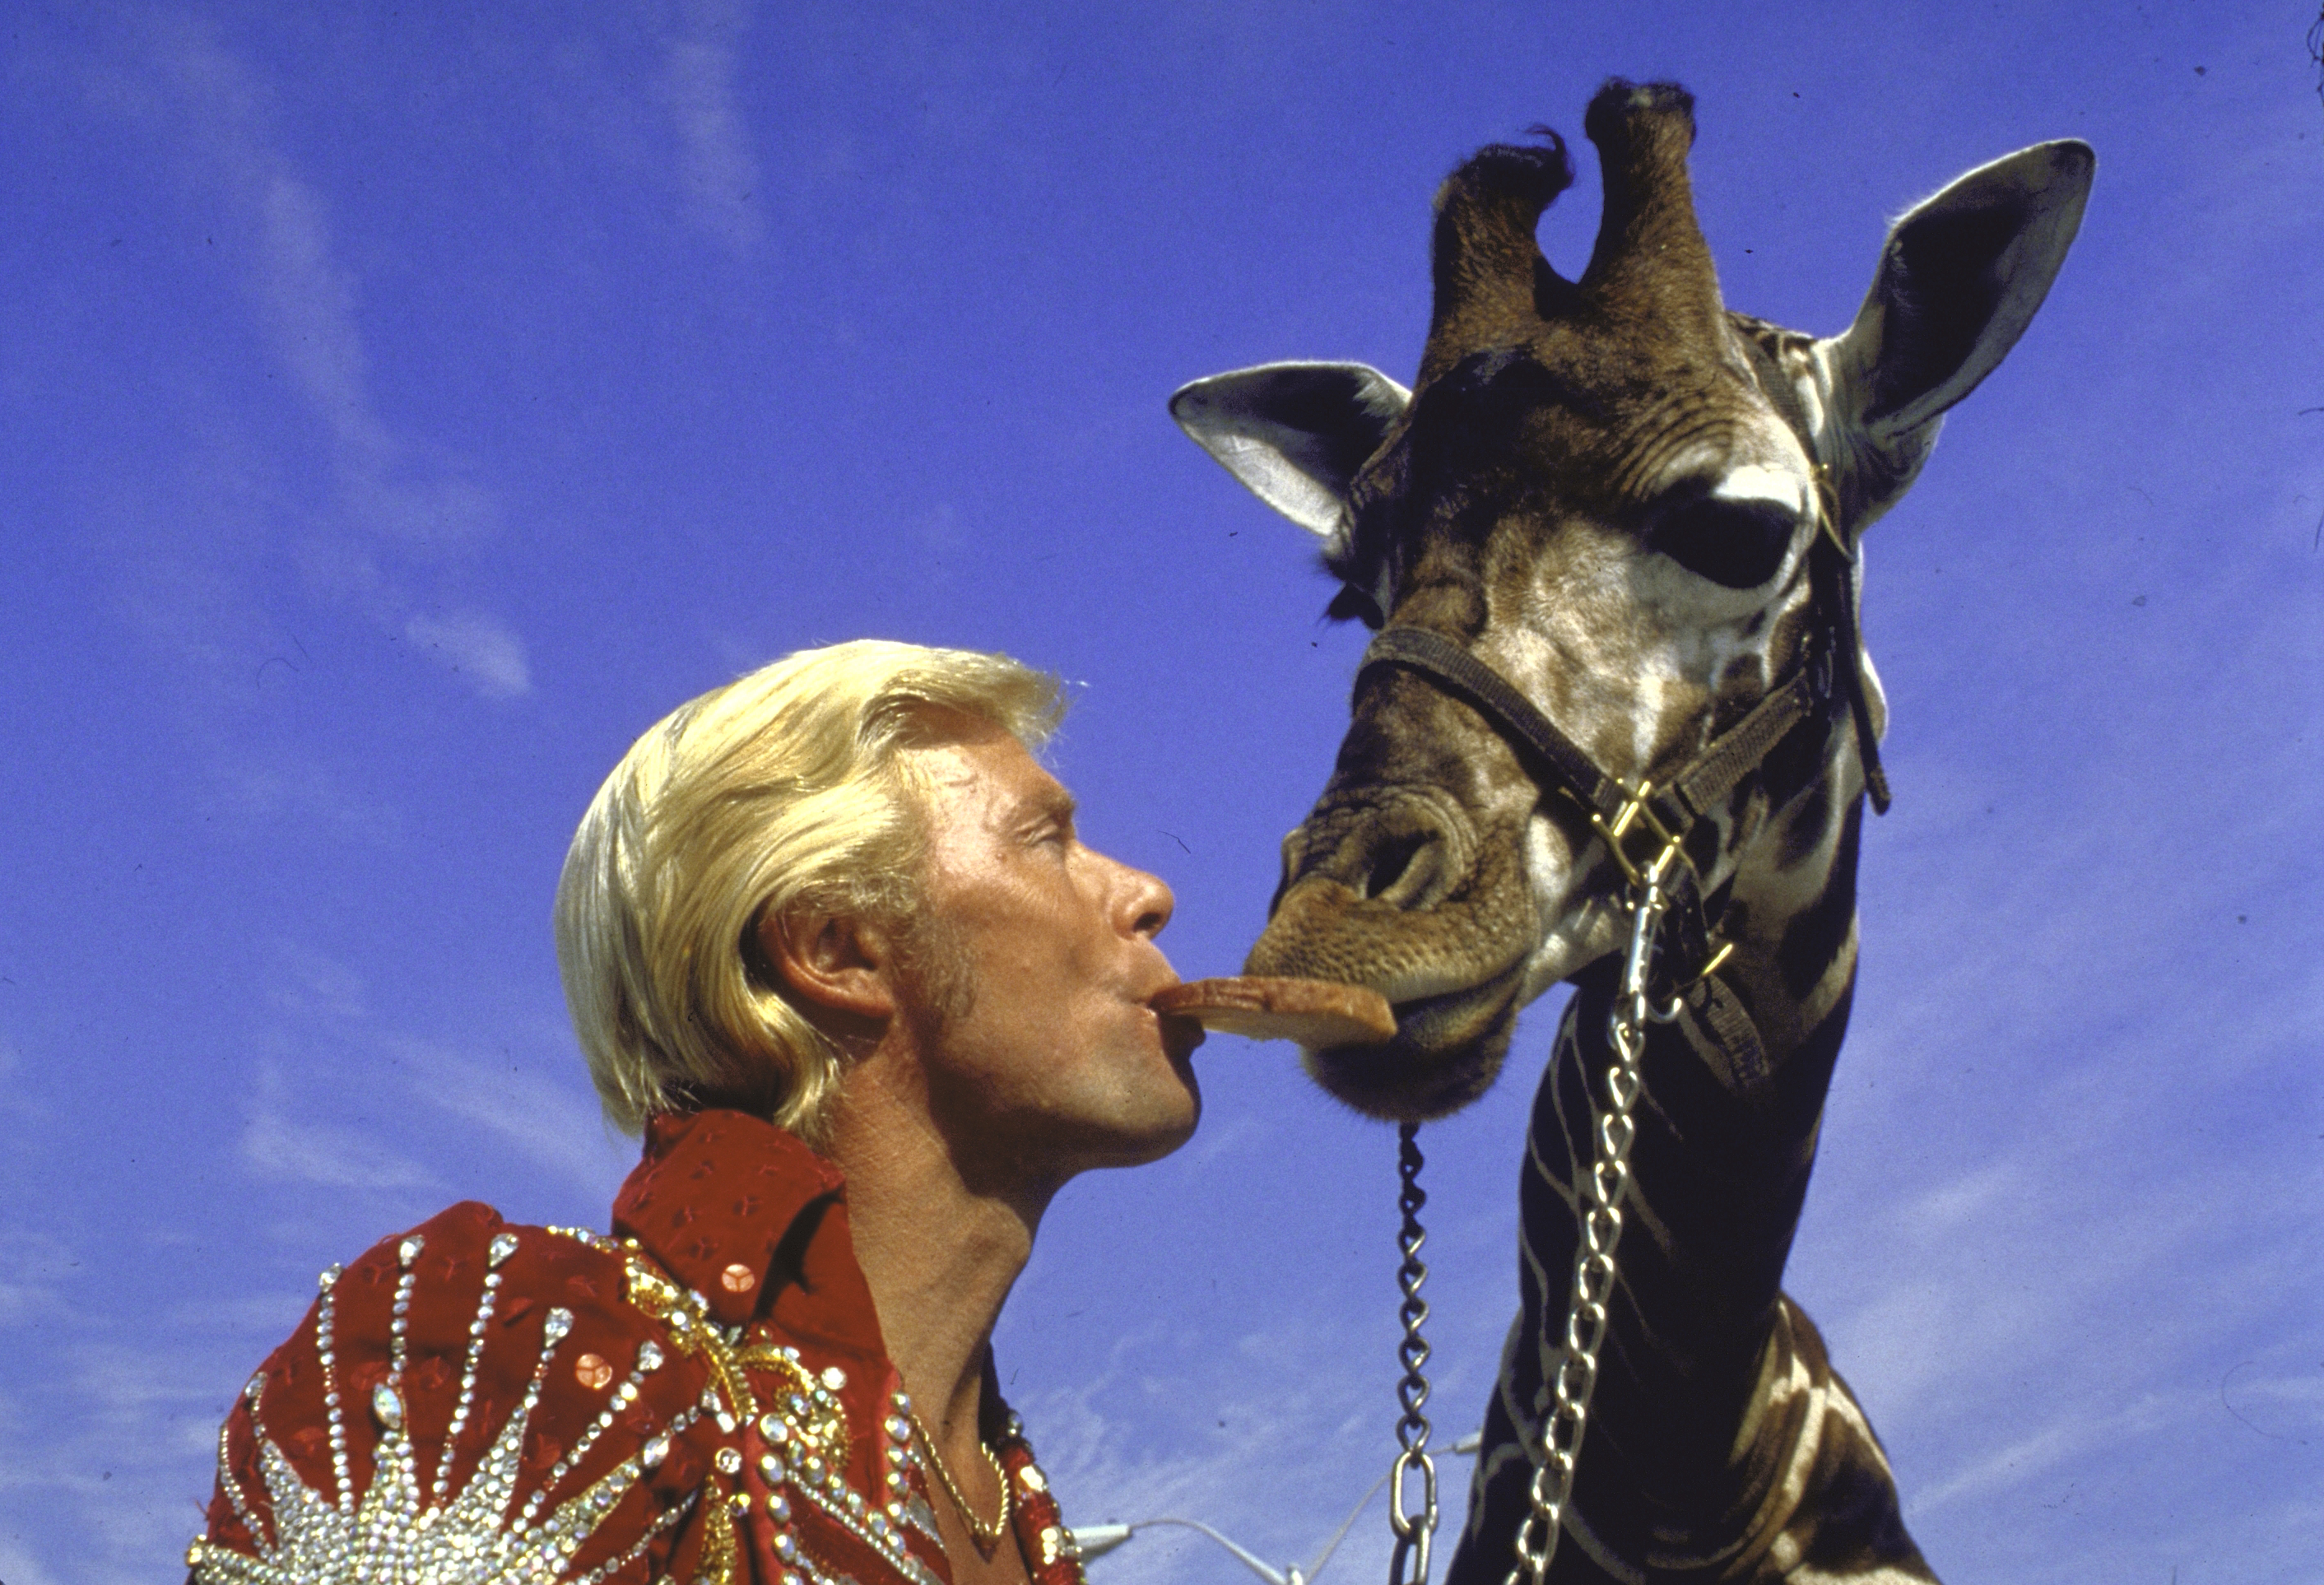 Animal trainer and circus headliner Gunther Gebel-Williams feeding trained giraffe.  (Photo by Ray Fisher/The LIFE Images Collection via Getty Images/Getty Images)